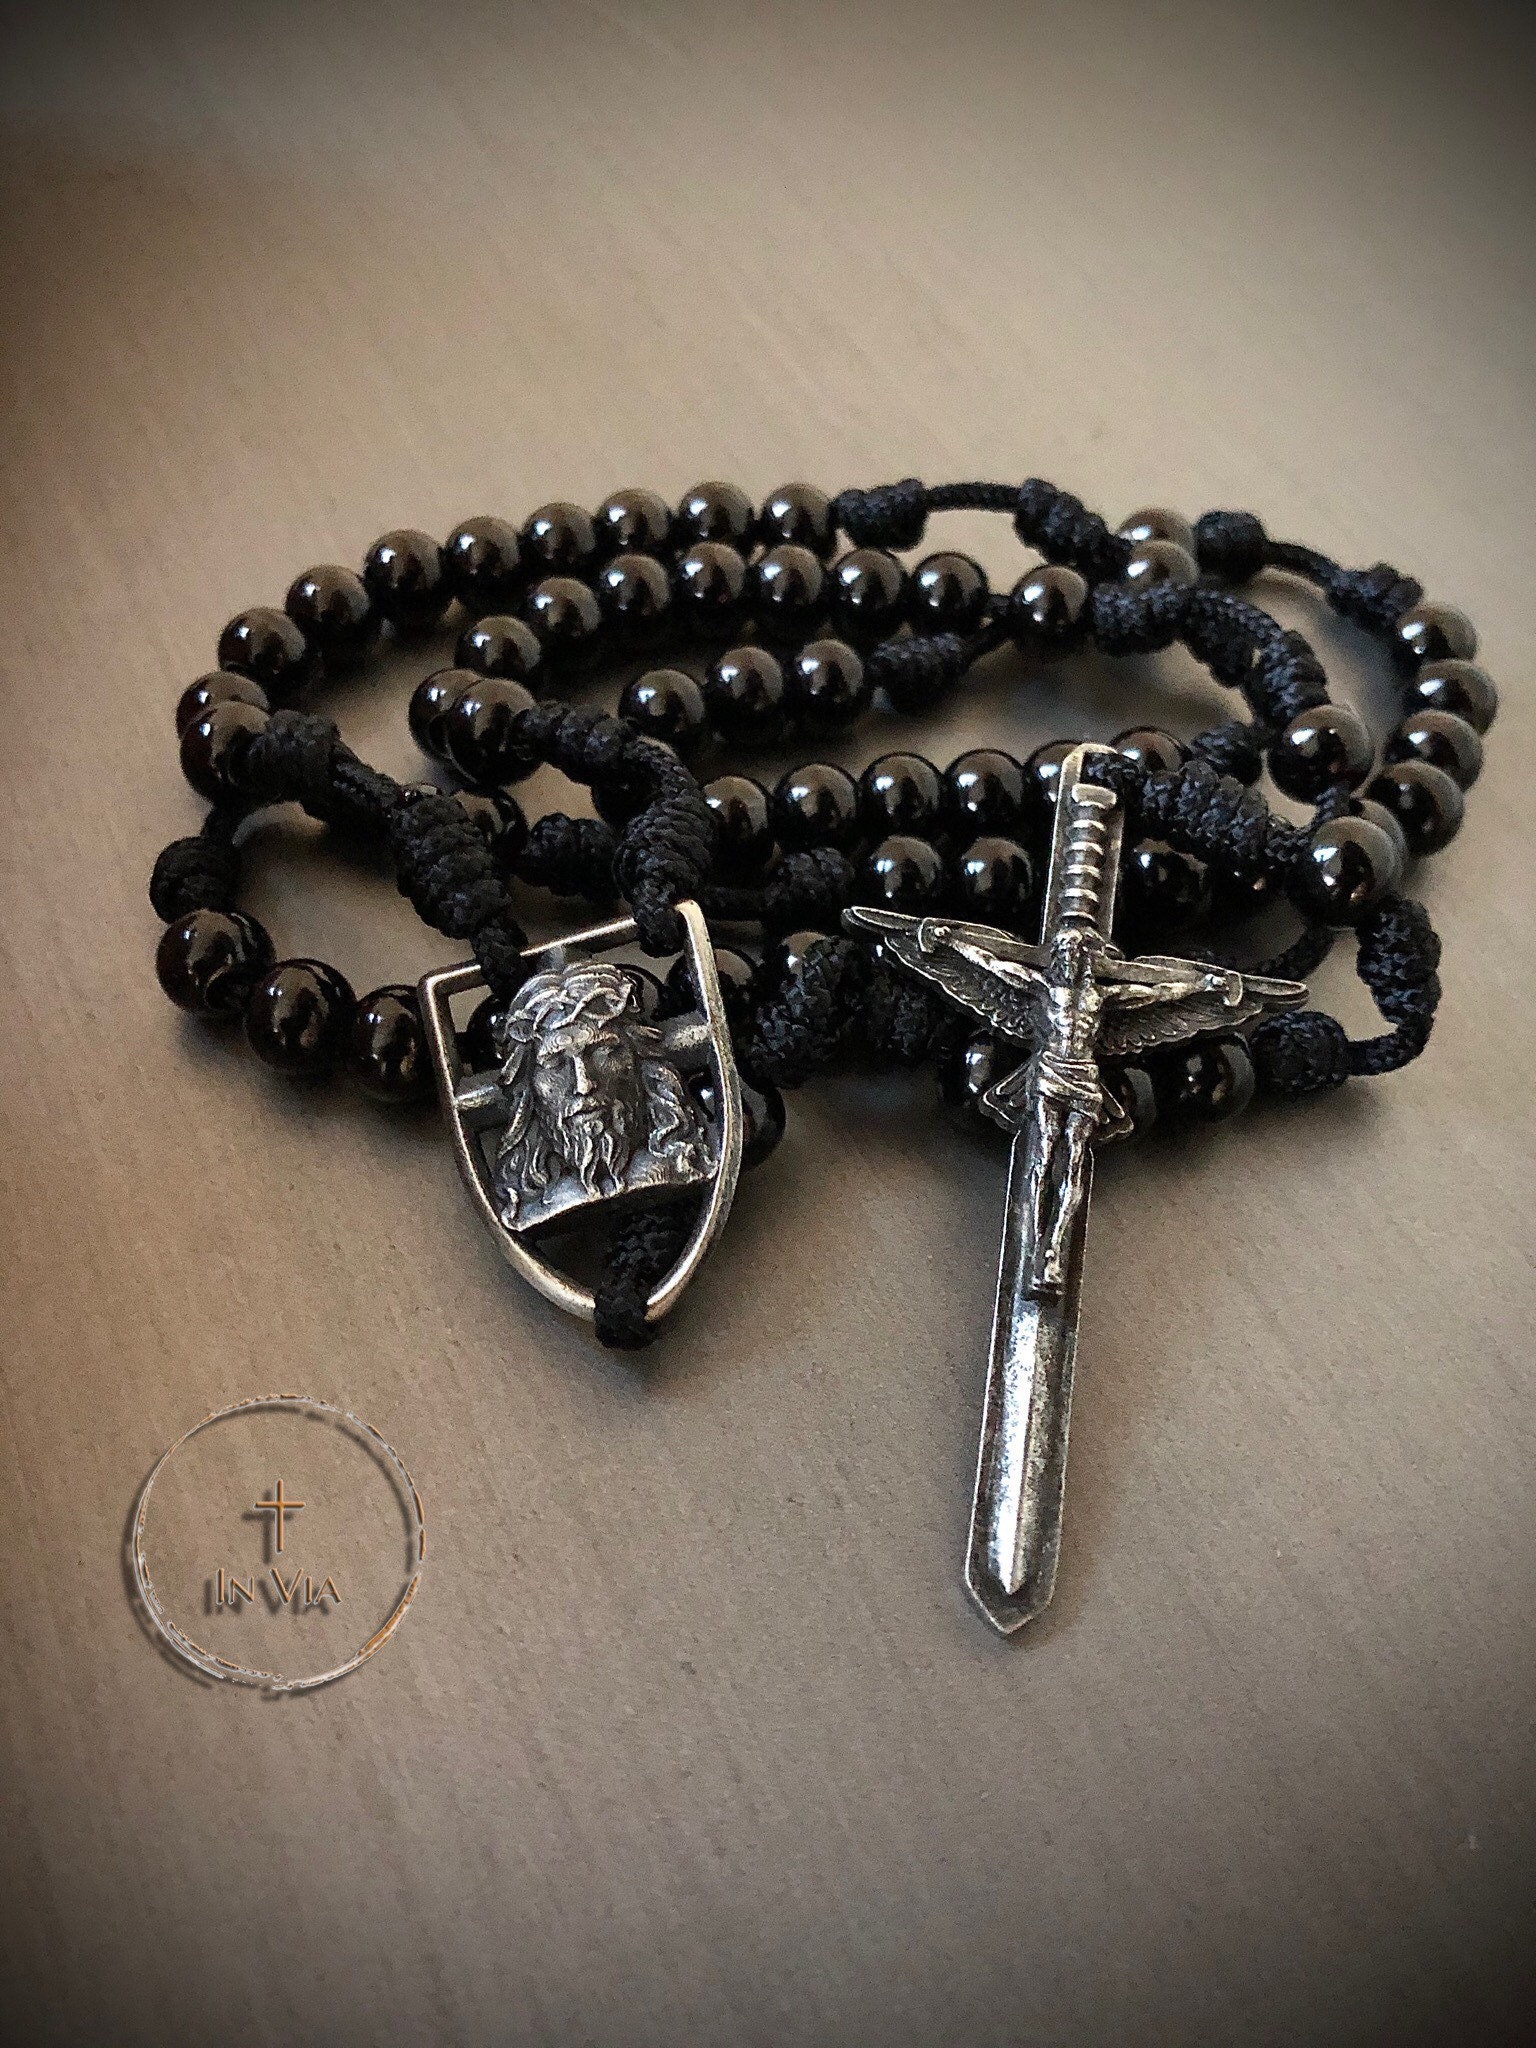 Black Beads Cross Rosary Necklaces for Men, Male Power Balance Hematite  Chain Necklace, Religious Faith Prayer Jewelry